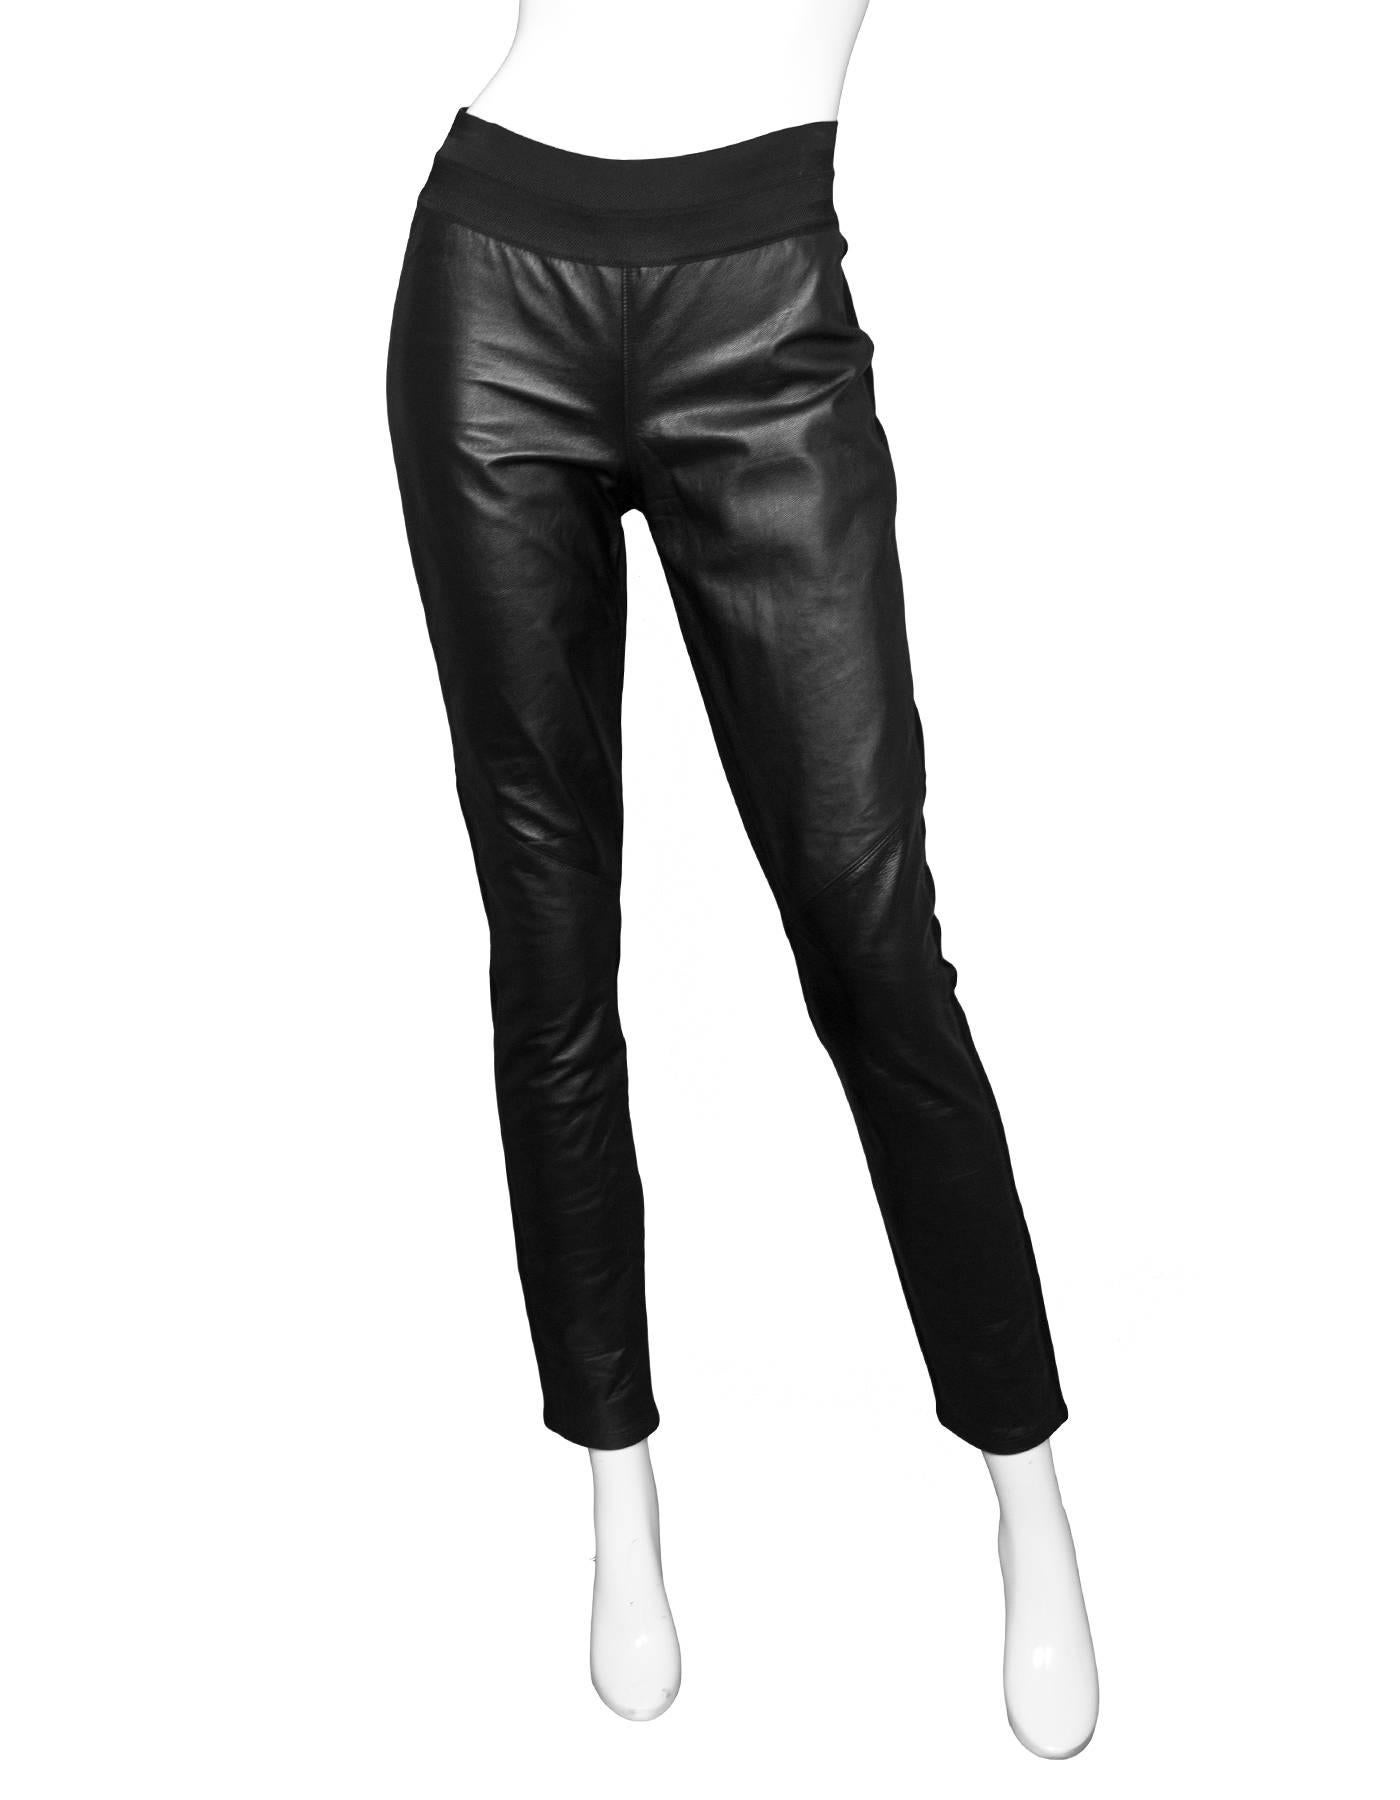 Paige Black Leather Leggings Sz L
Features stretch waistband

Made In: China
Color: Black
Closure/Opening: Pull-up
Composition: Genuine leather, 65% rayon, 30% nylon, 5% elastane
Exterior Pockets: None
Interior Pockets: None
Overall Condition: